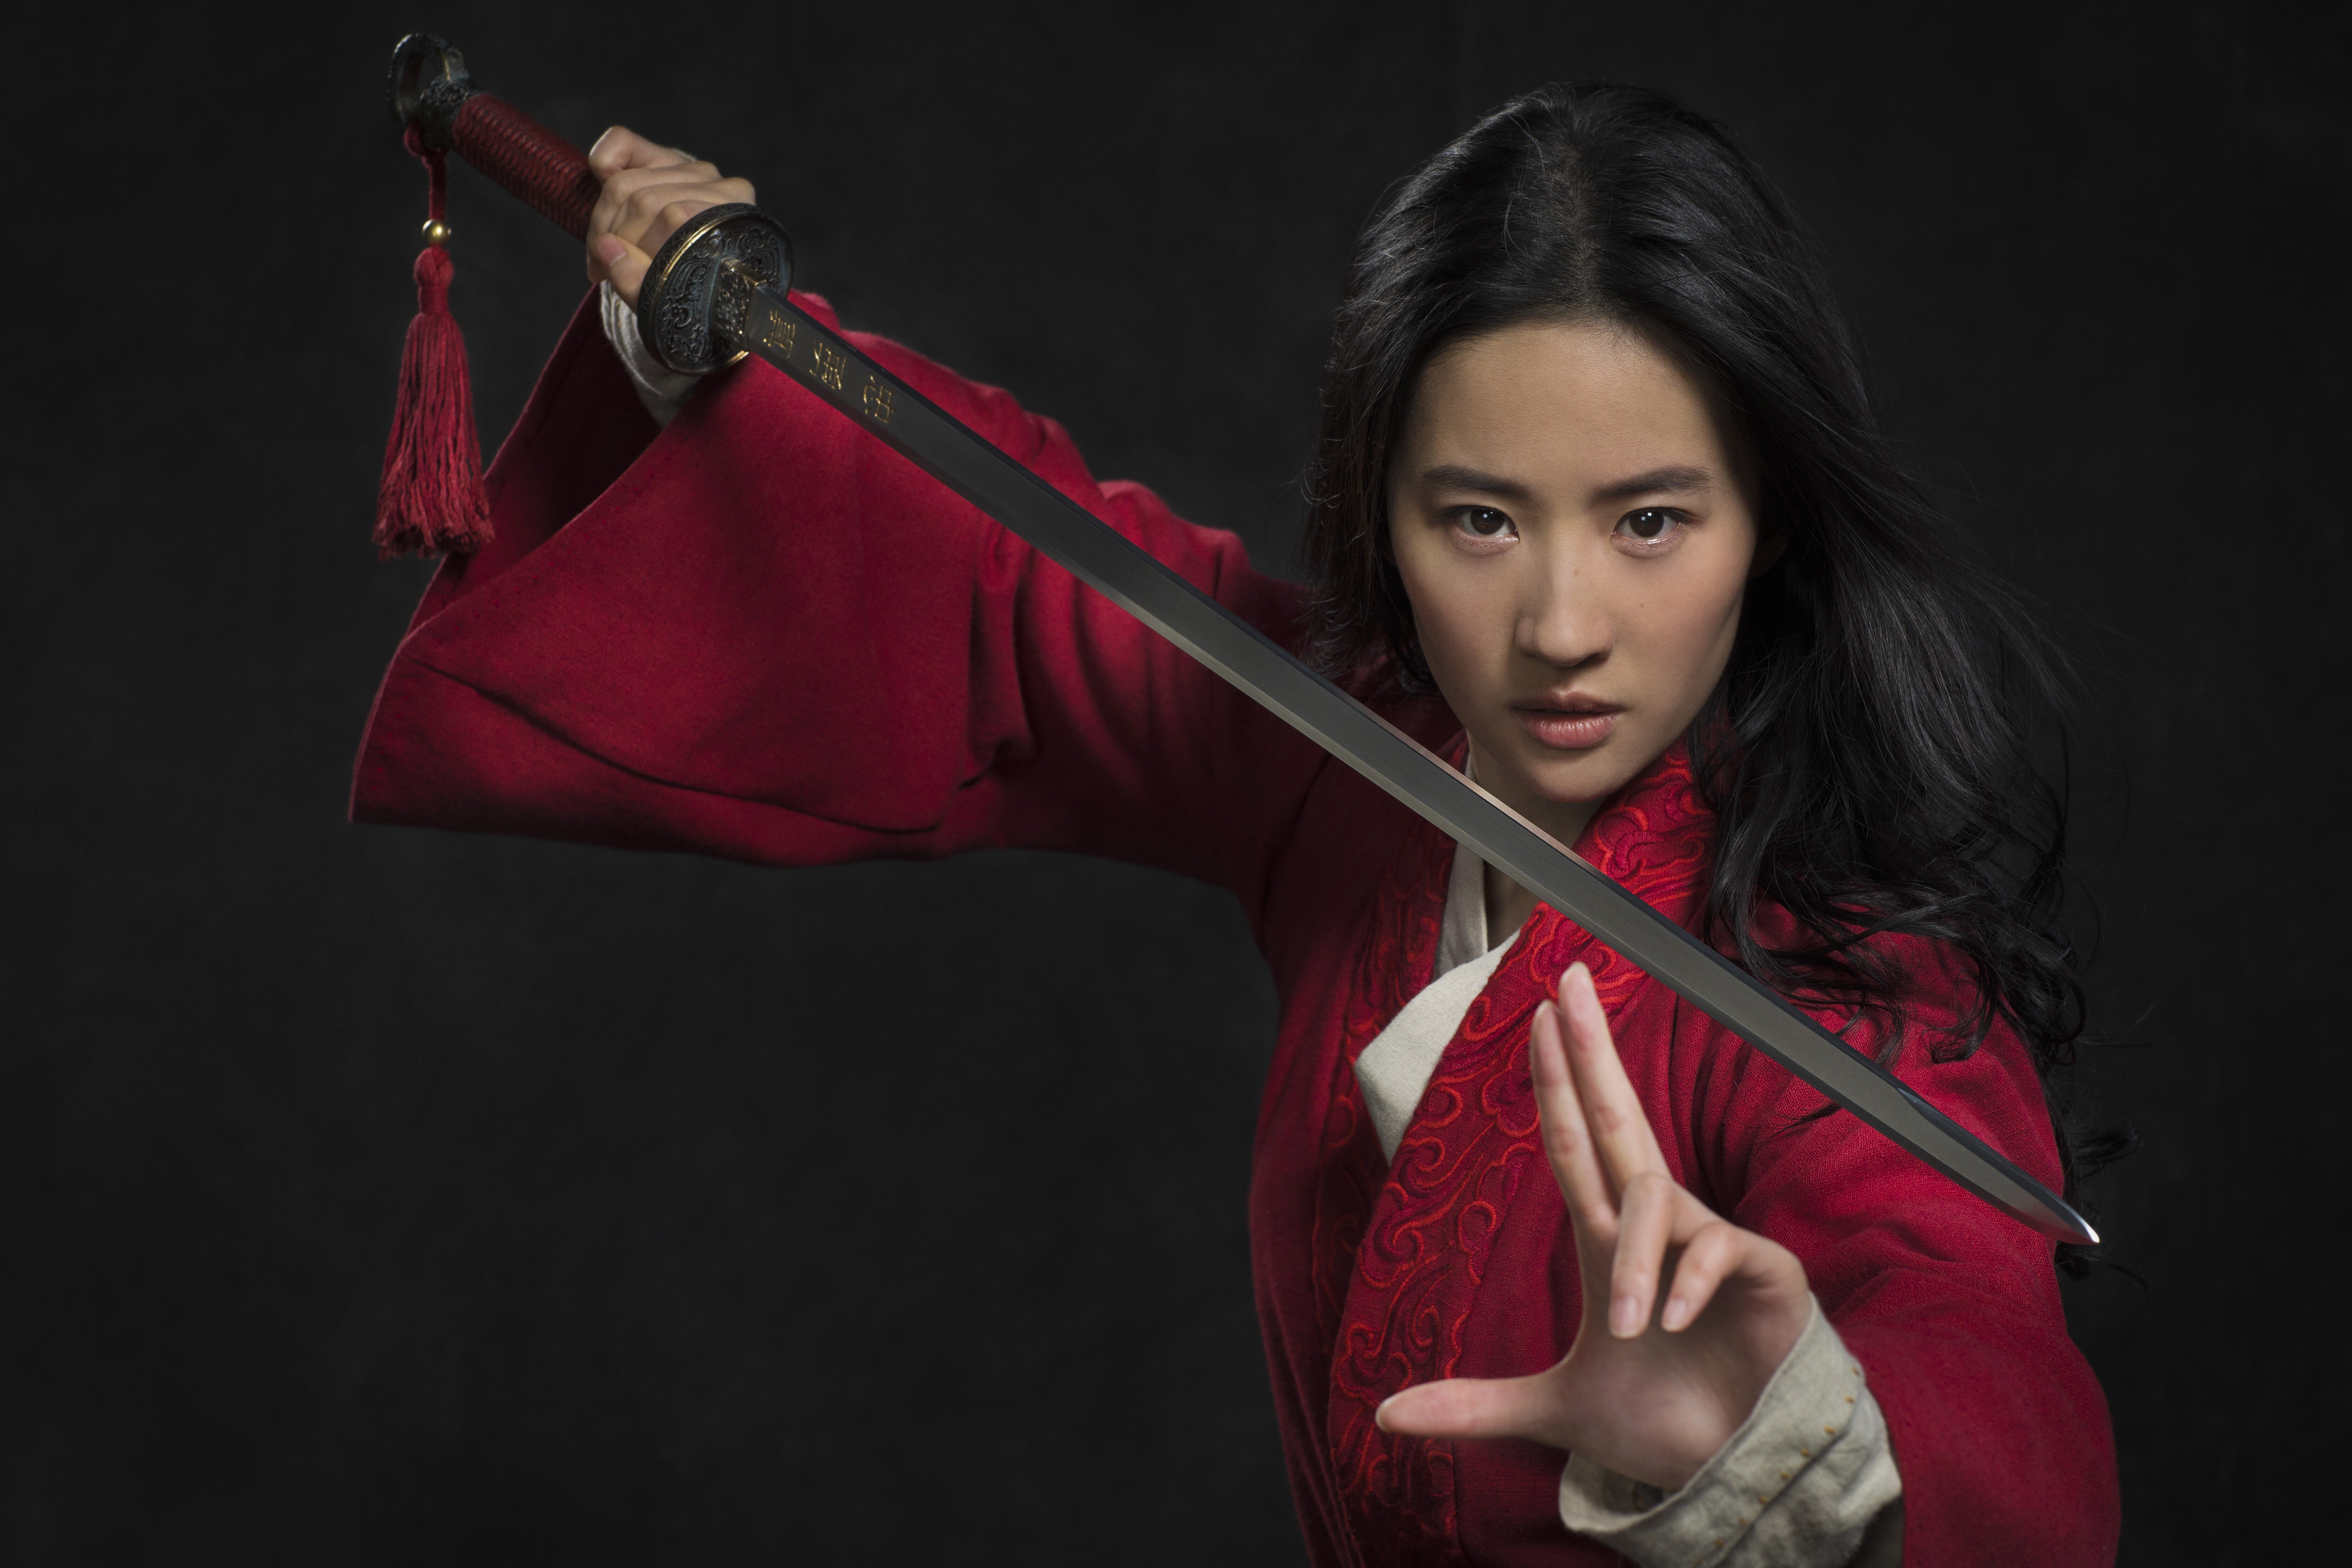 Mulan (Yifei Liu) holds a sword in a scene of Disney's live action remake of “Mulan.” The film is facing calls for a boycott after the company thanked government entities in Xinjiang, a Chinese region where authorities are accused of suppressing ethnic minorities.